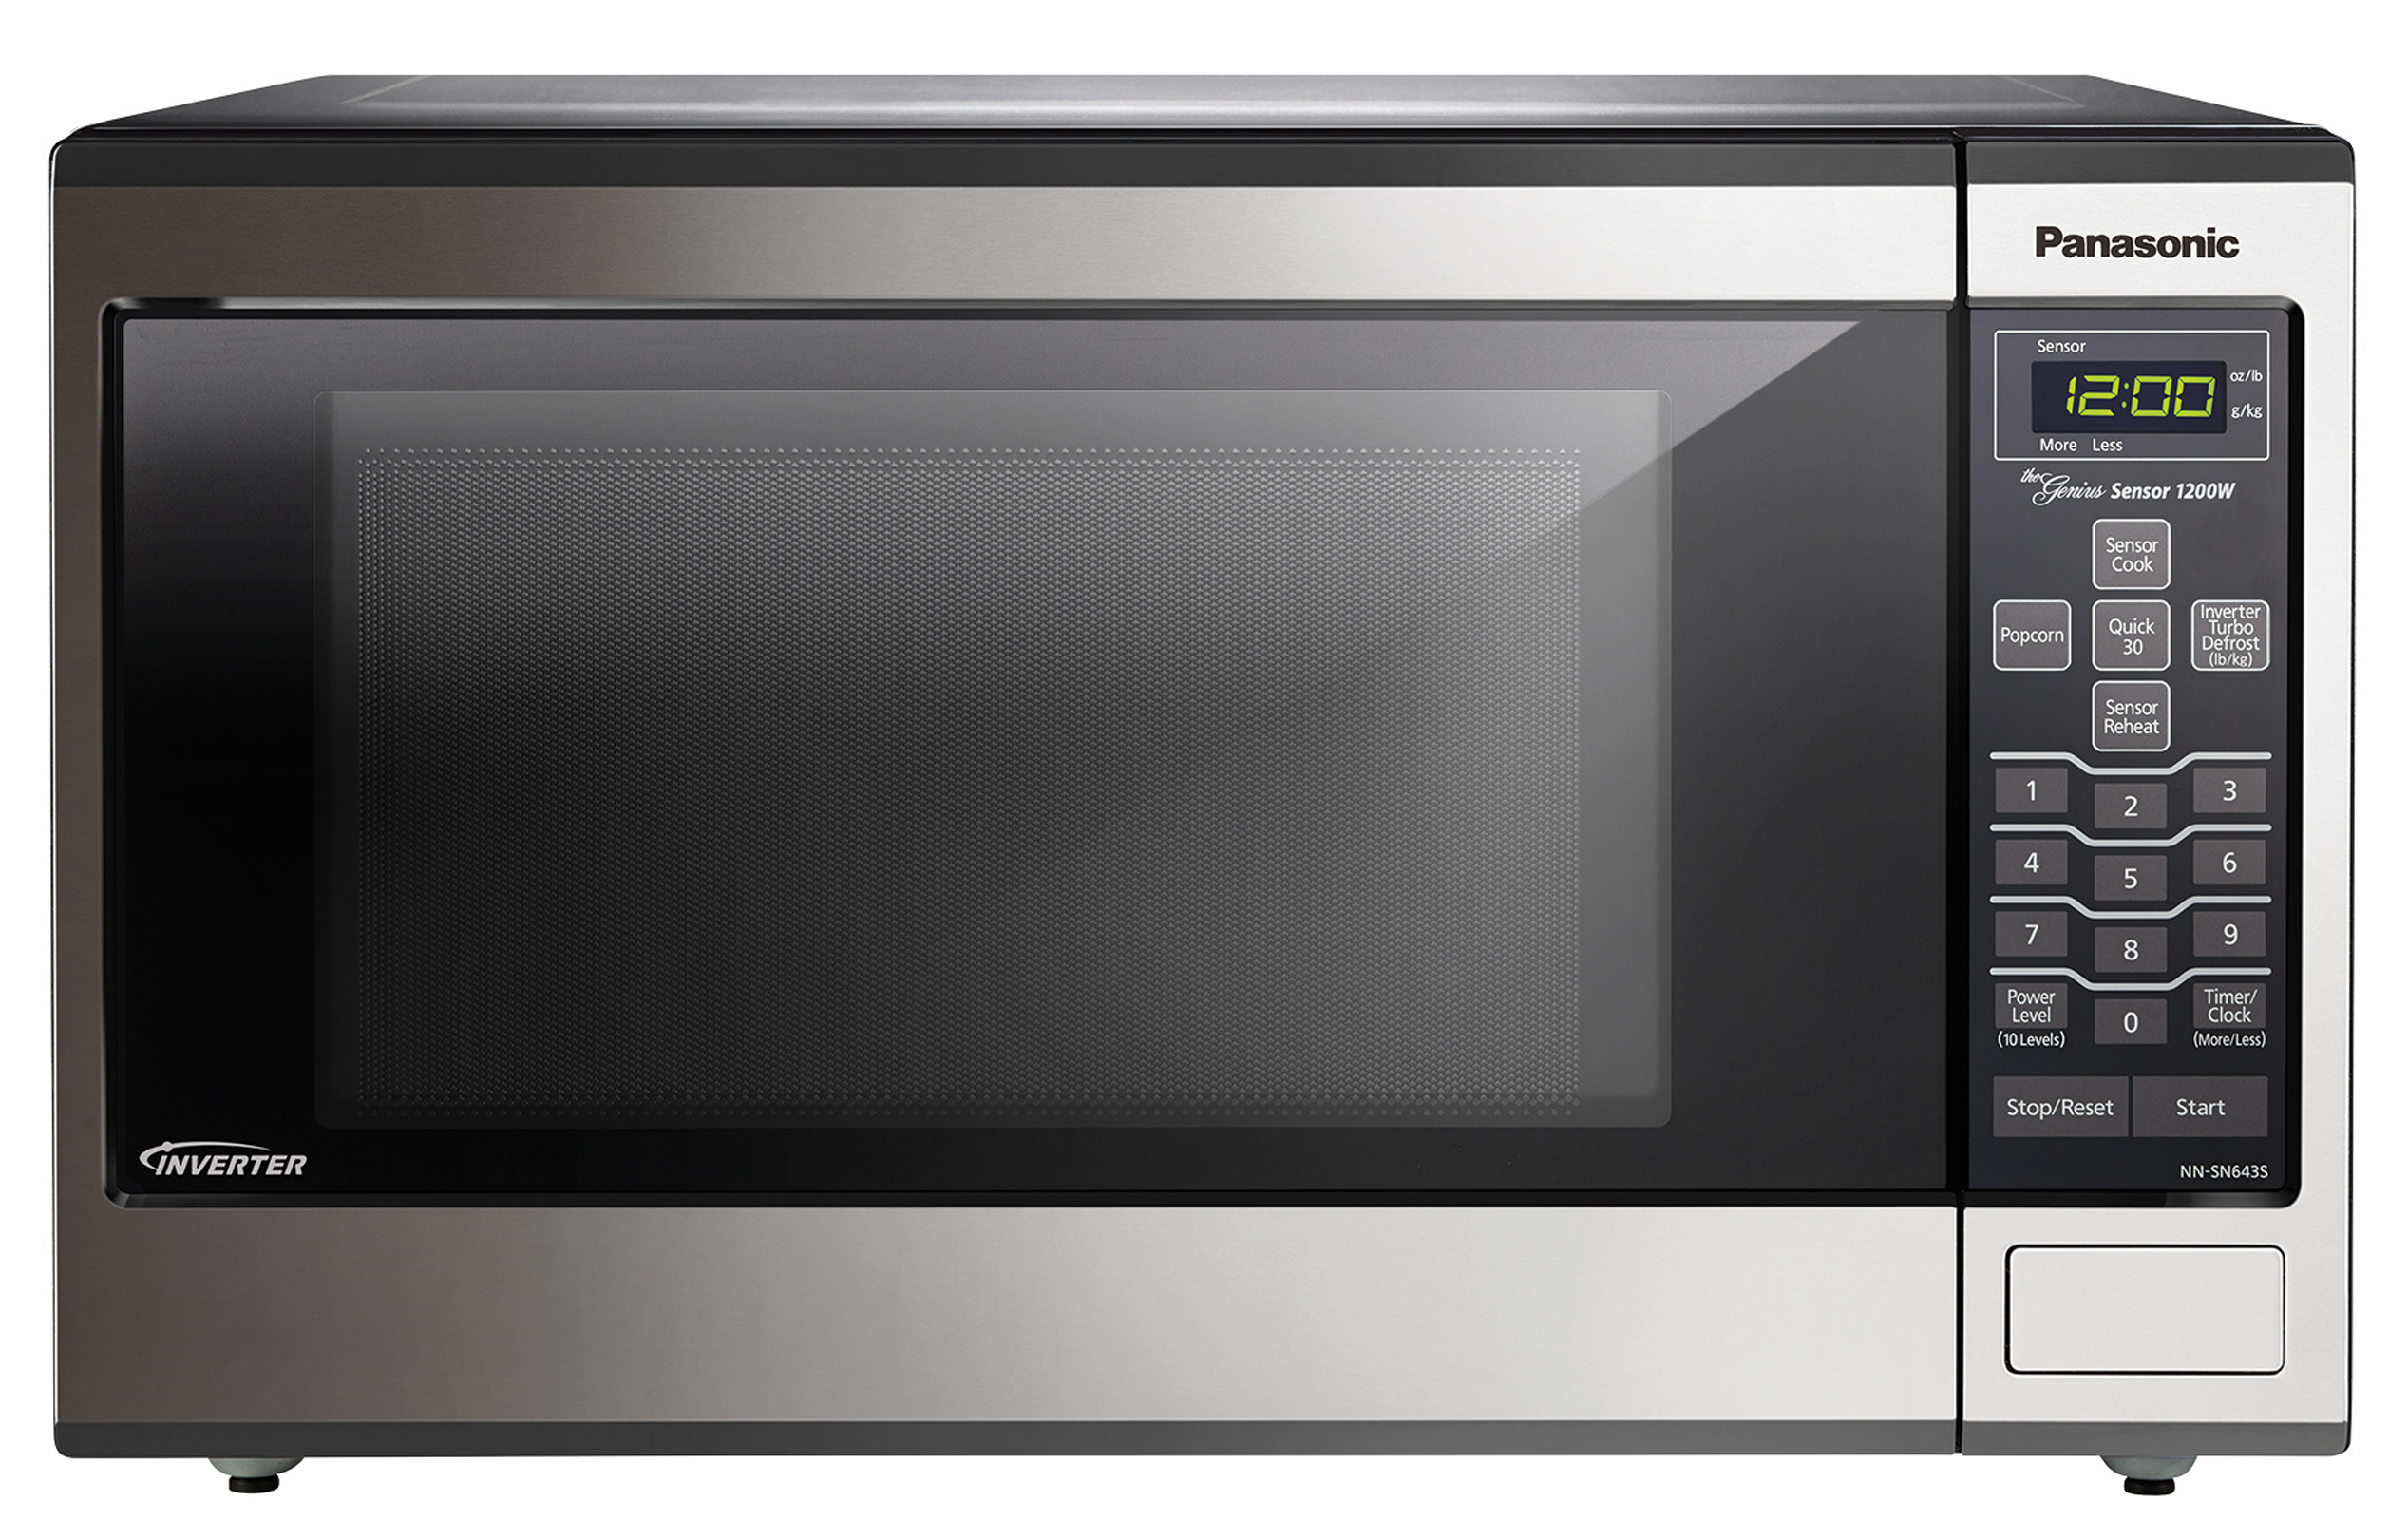 Panasonic NNSN643S - 1.2 cu. ft. Countertop/Built-In Microwave with